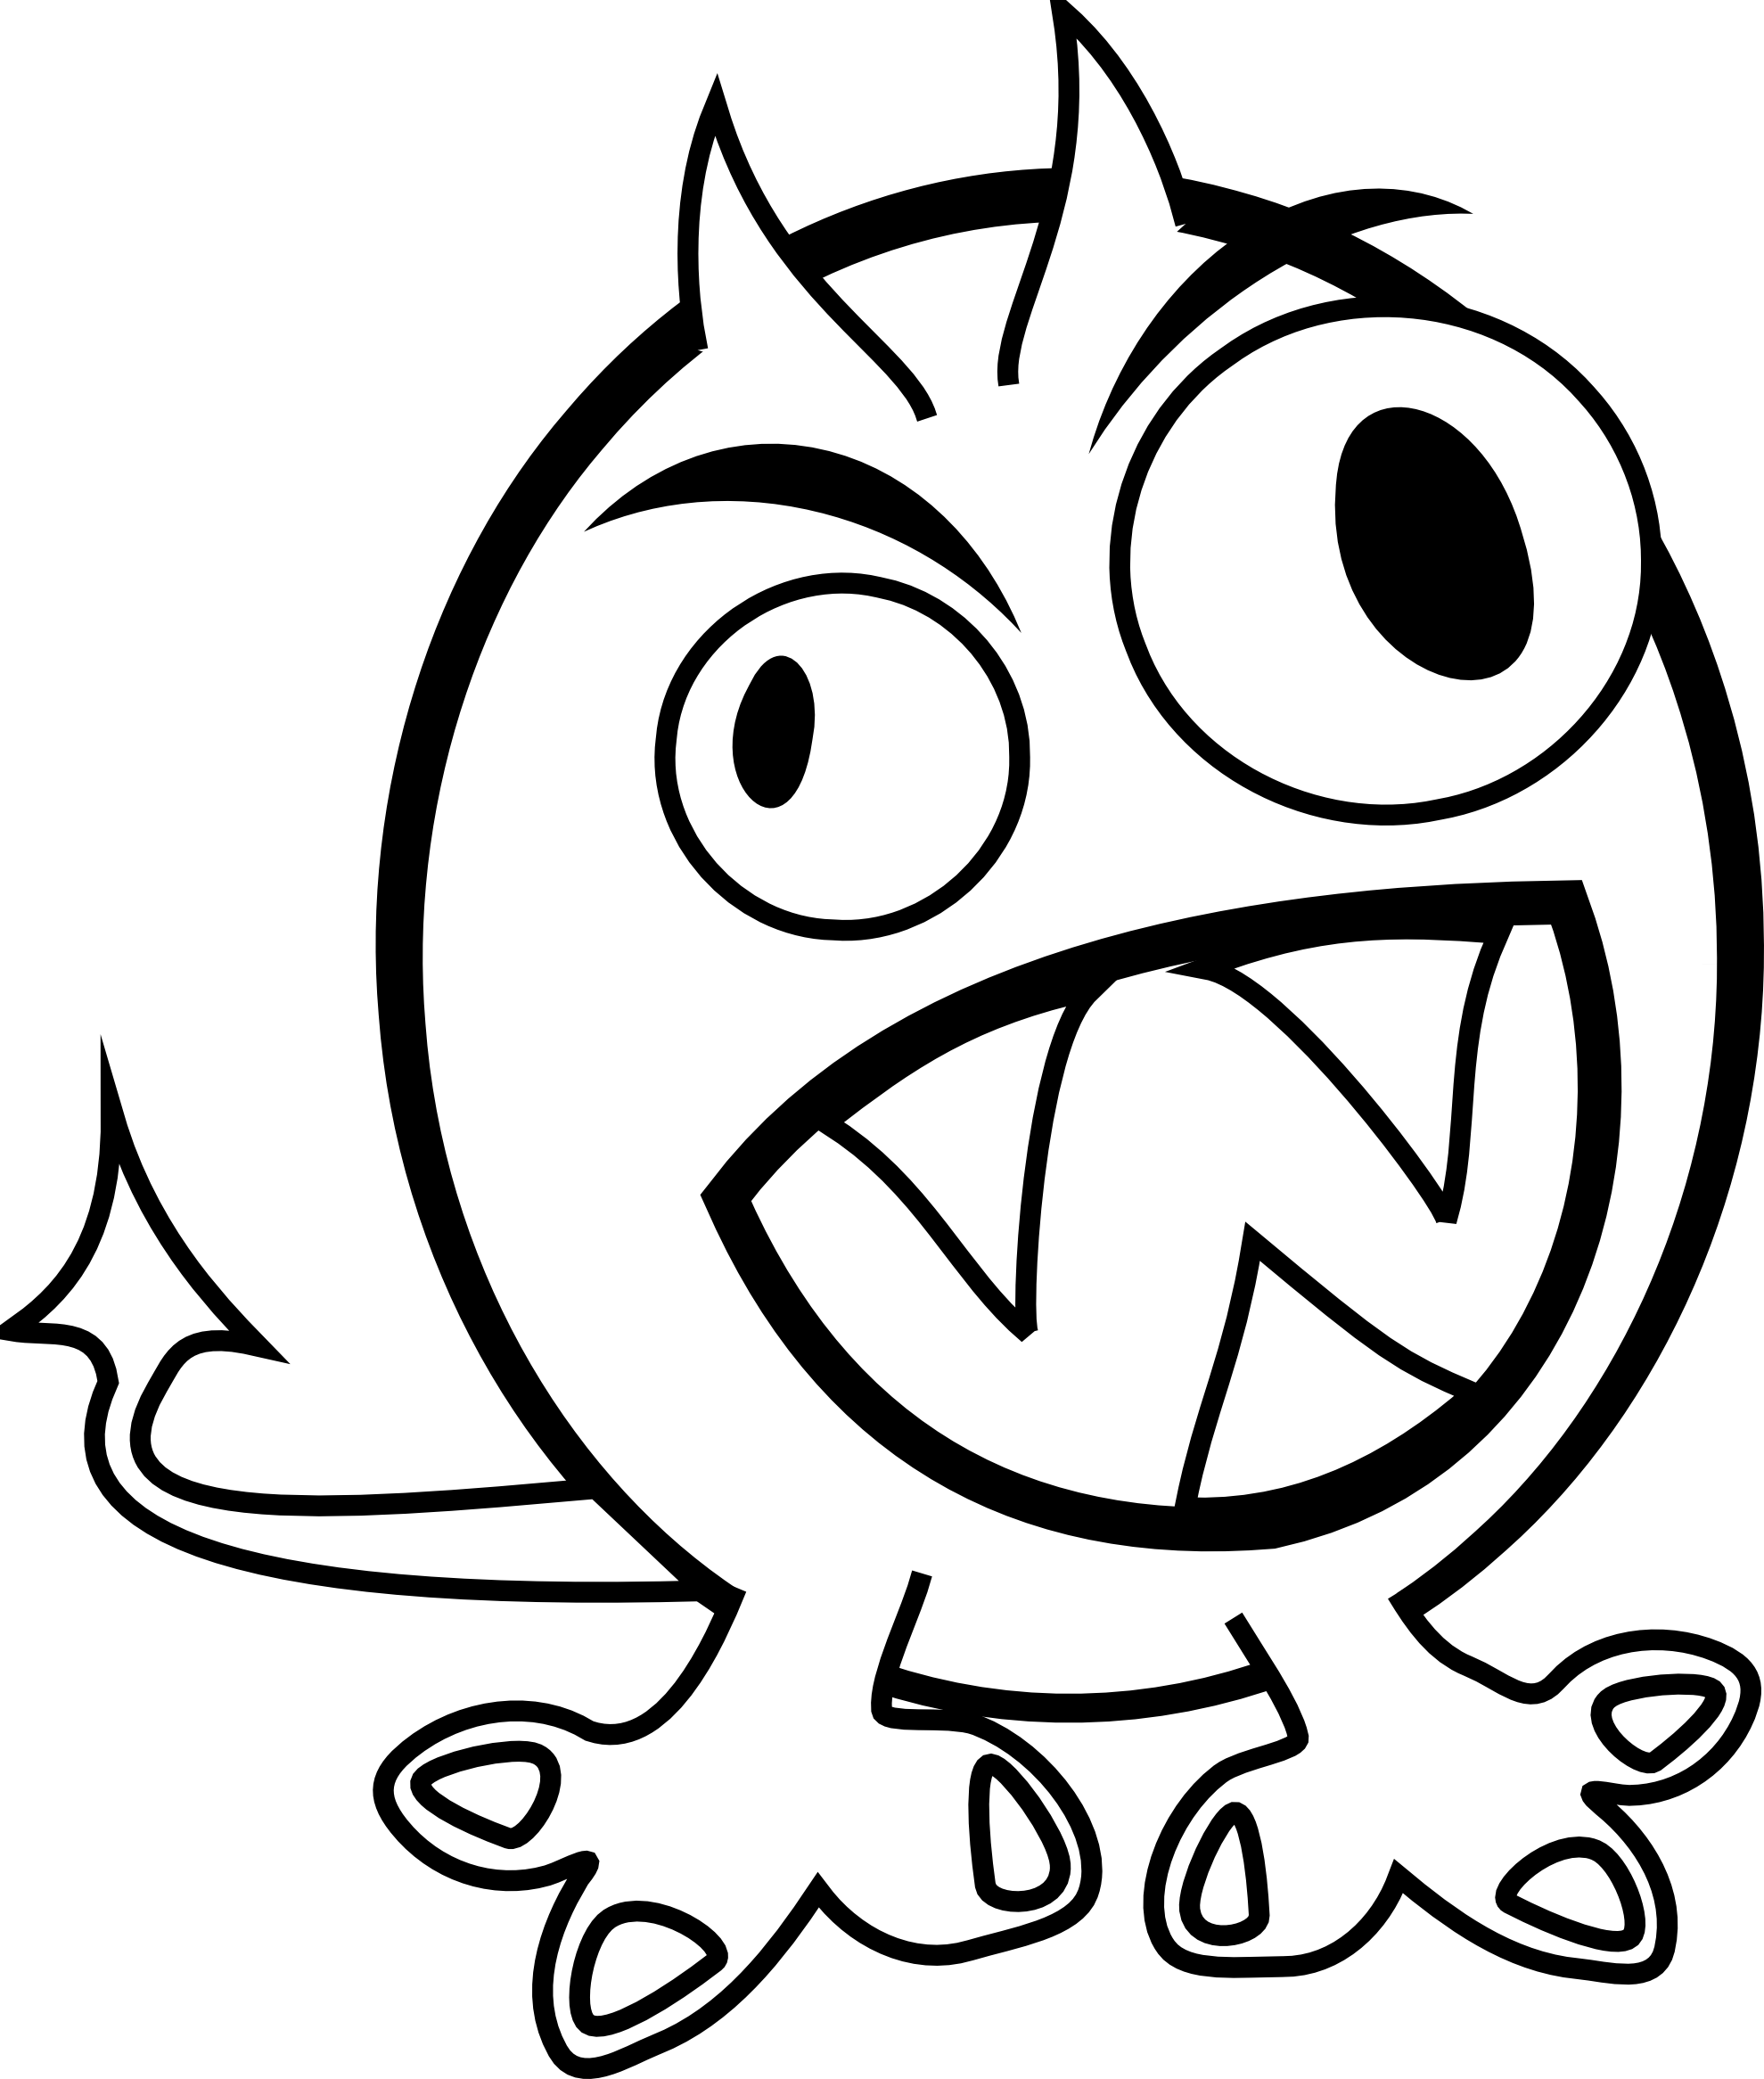 Monster Inc Clipart Black And White   Clipart Panda   Free Clipart